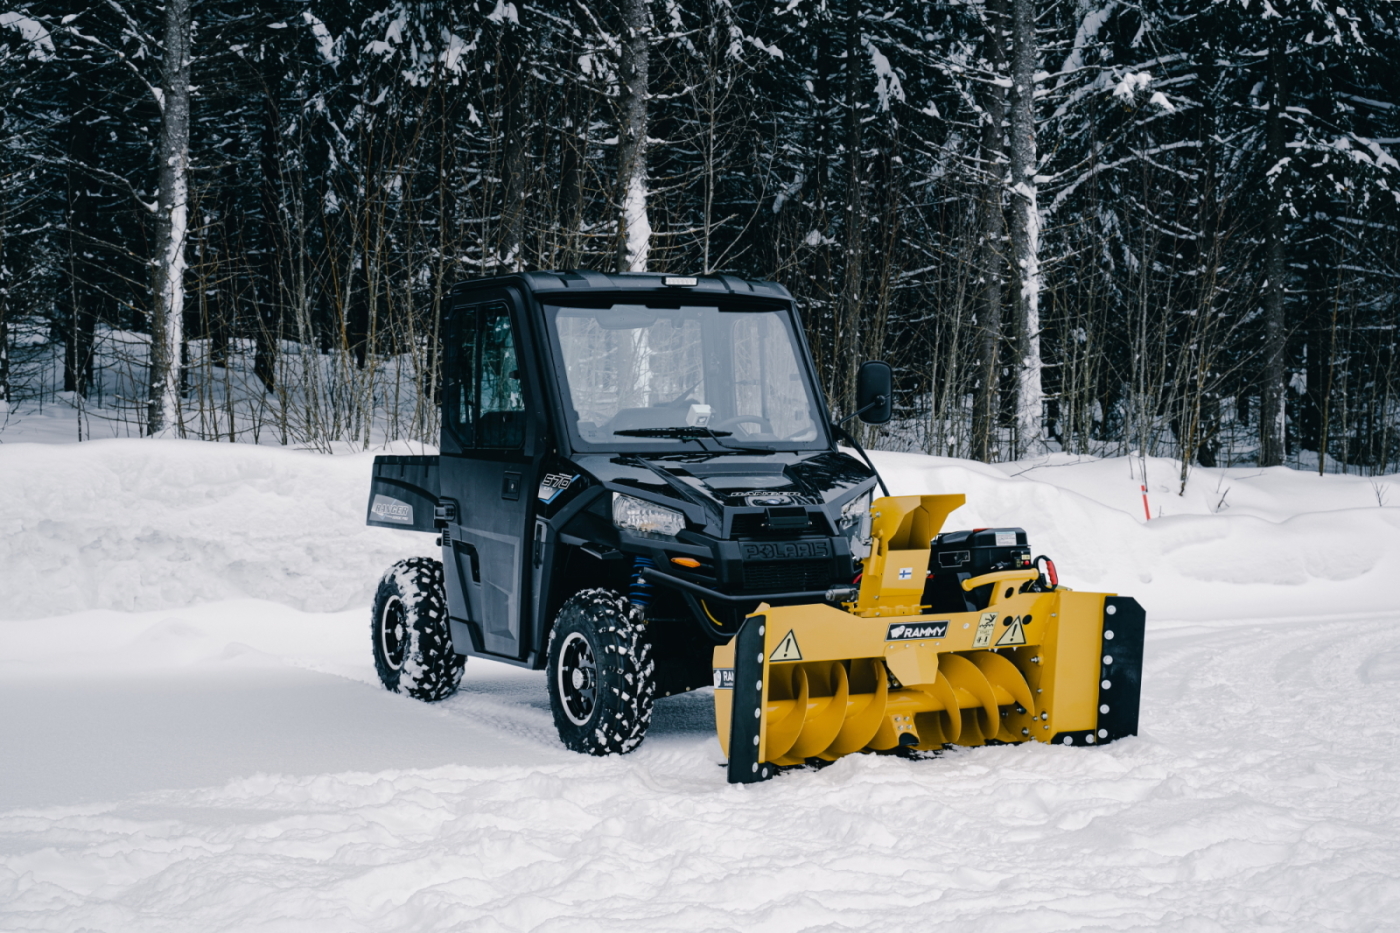 2023 RAMMY Snowblower - 155 UTV PRO for sale in the Pompano Beach, FL area. Get the best drive out price on 2023 RAMMY Snowblower - 155 UTV PRO and compare.